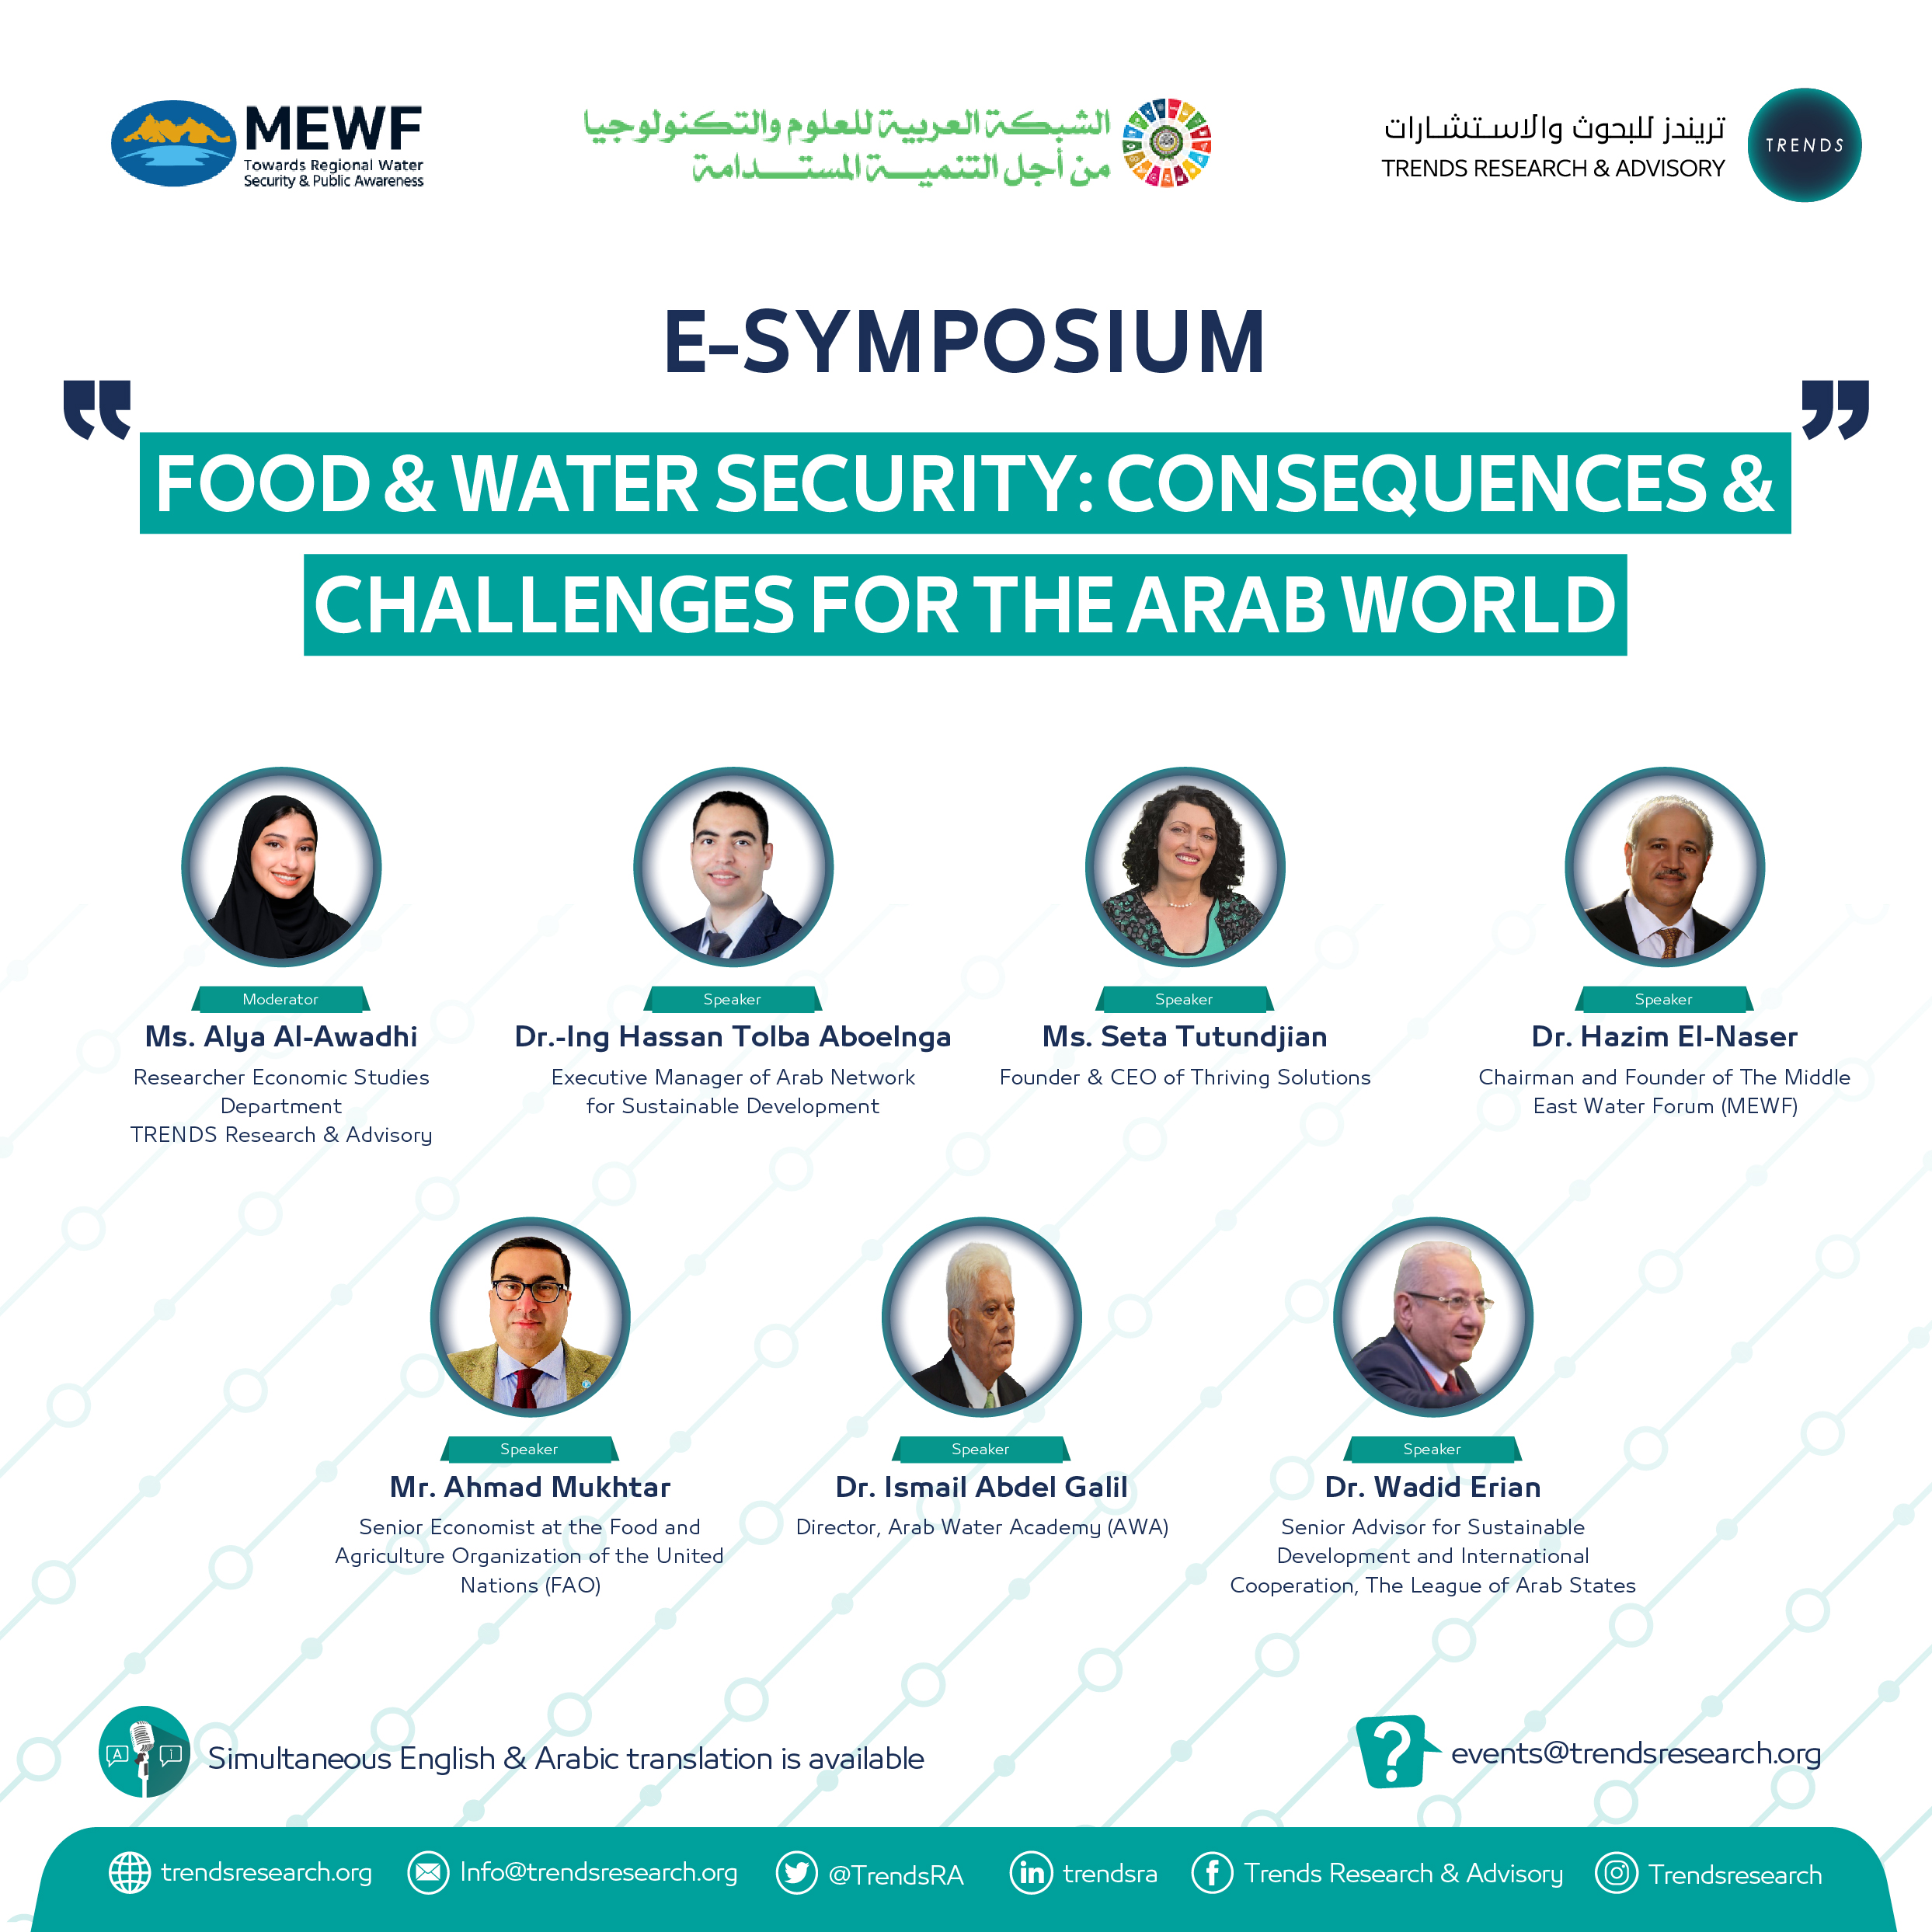 Food and Water Security: Consequences and Challenges for the Arab World